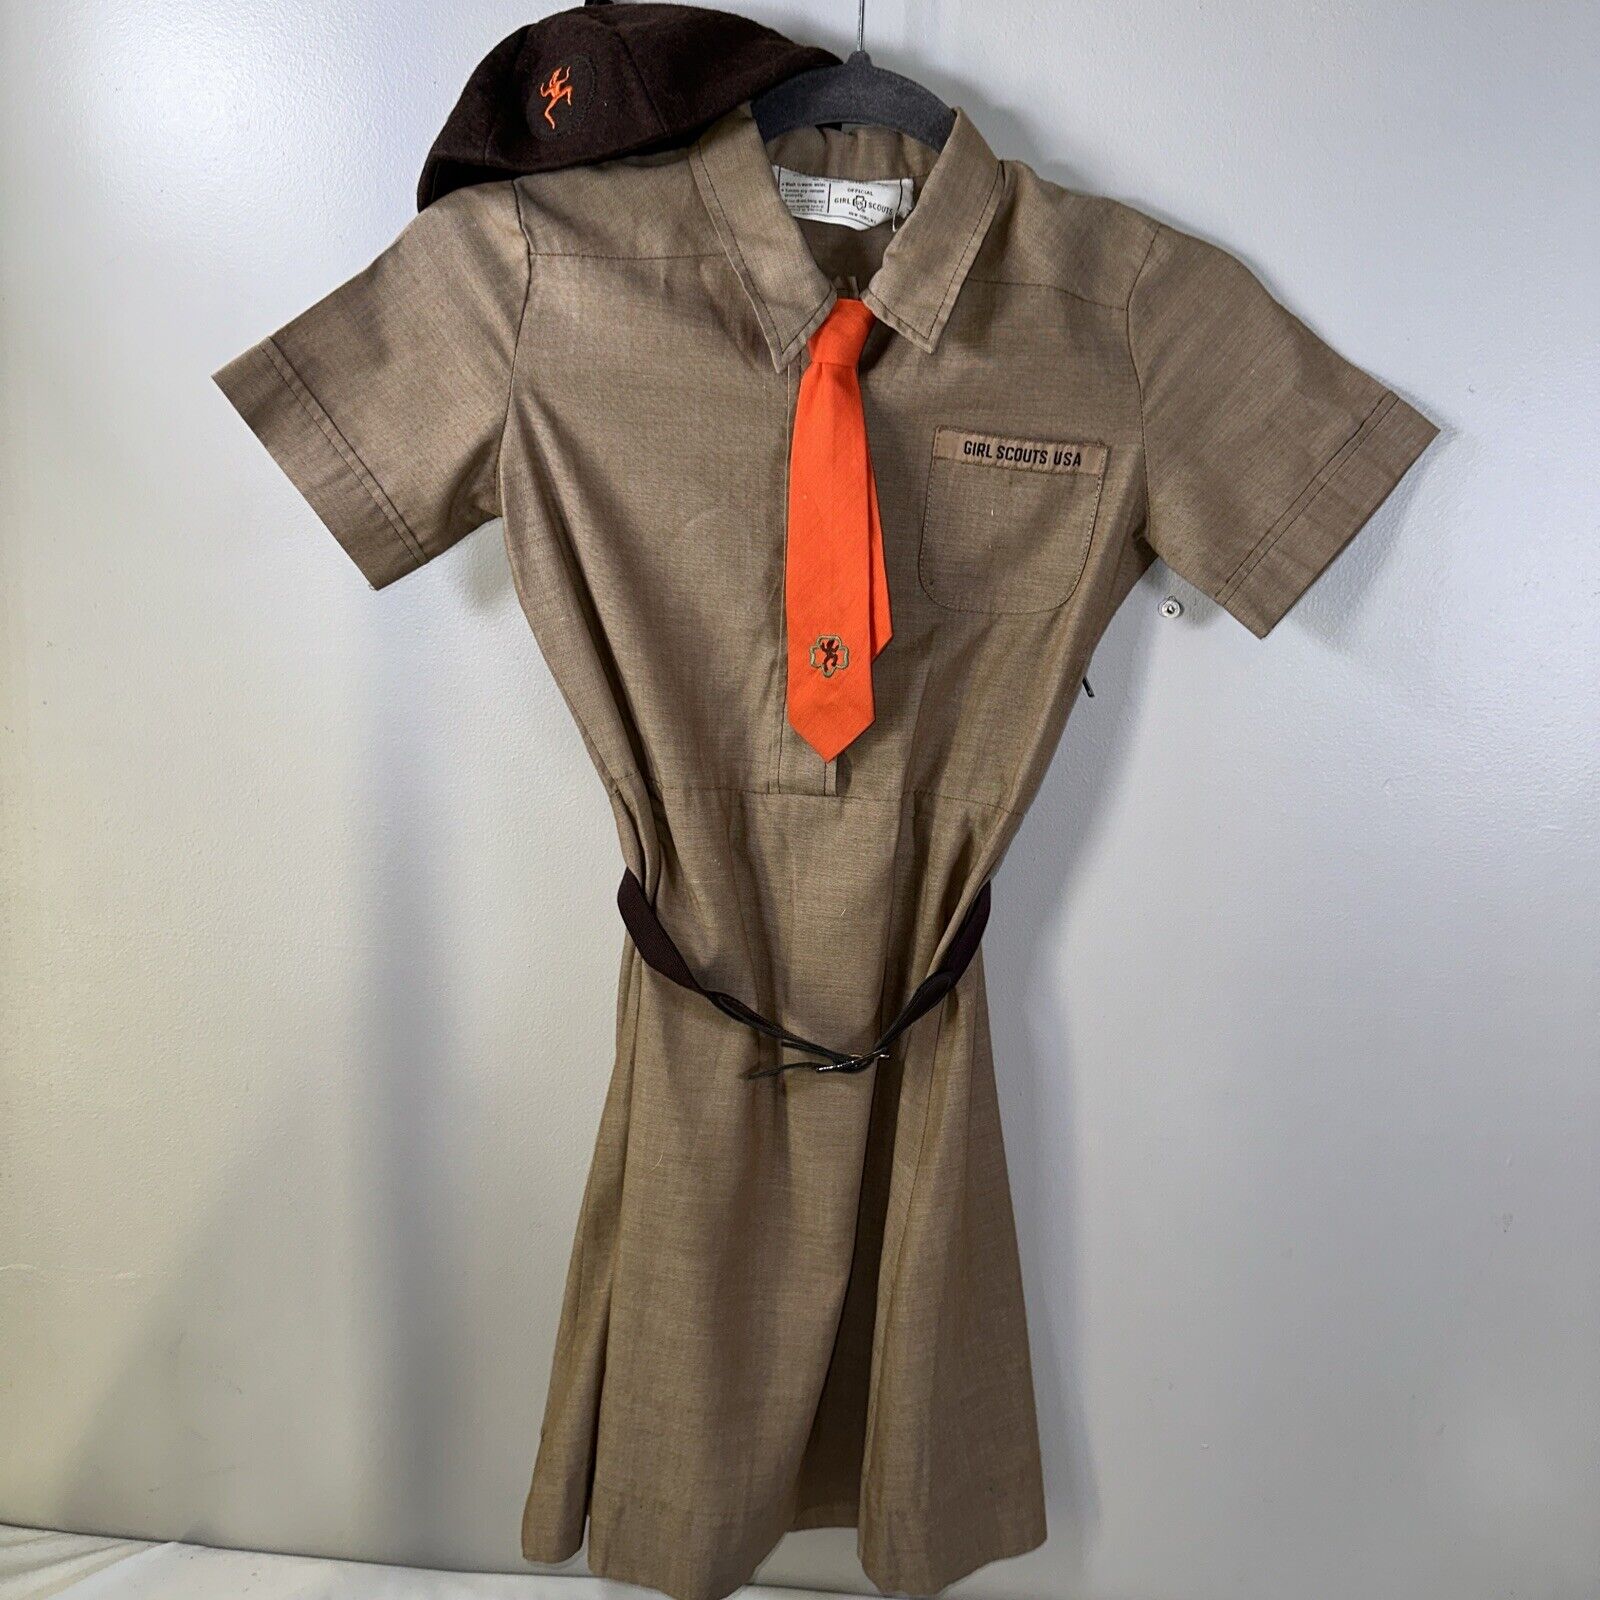 Vintage Girl Scouts Uniform Brown Dress Official 1970s Girl Scout Girls